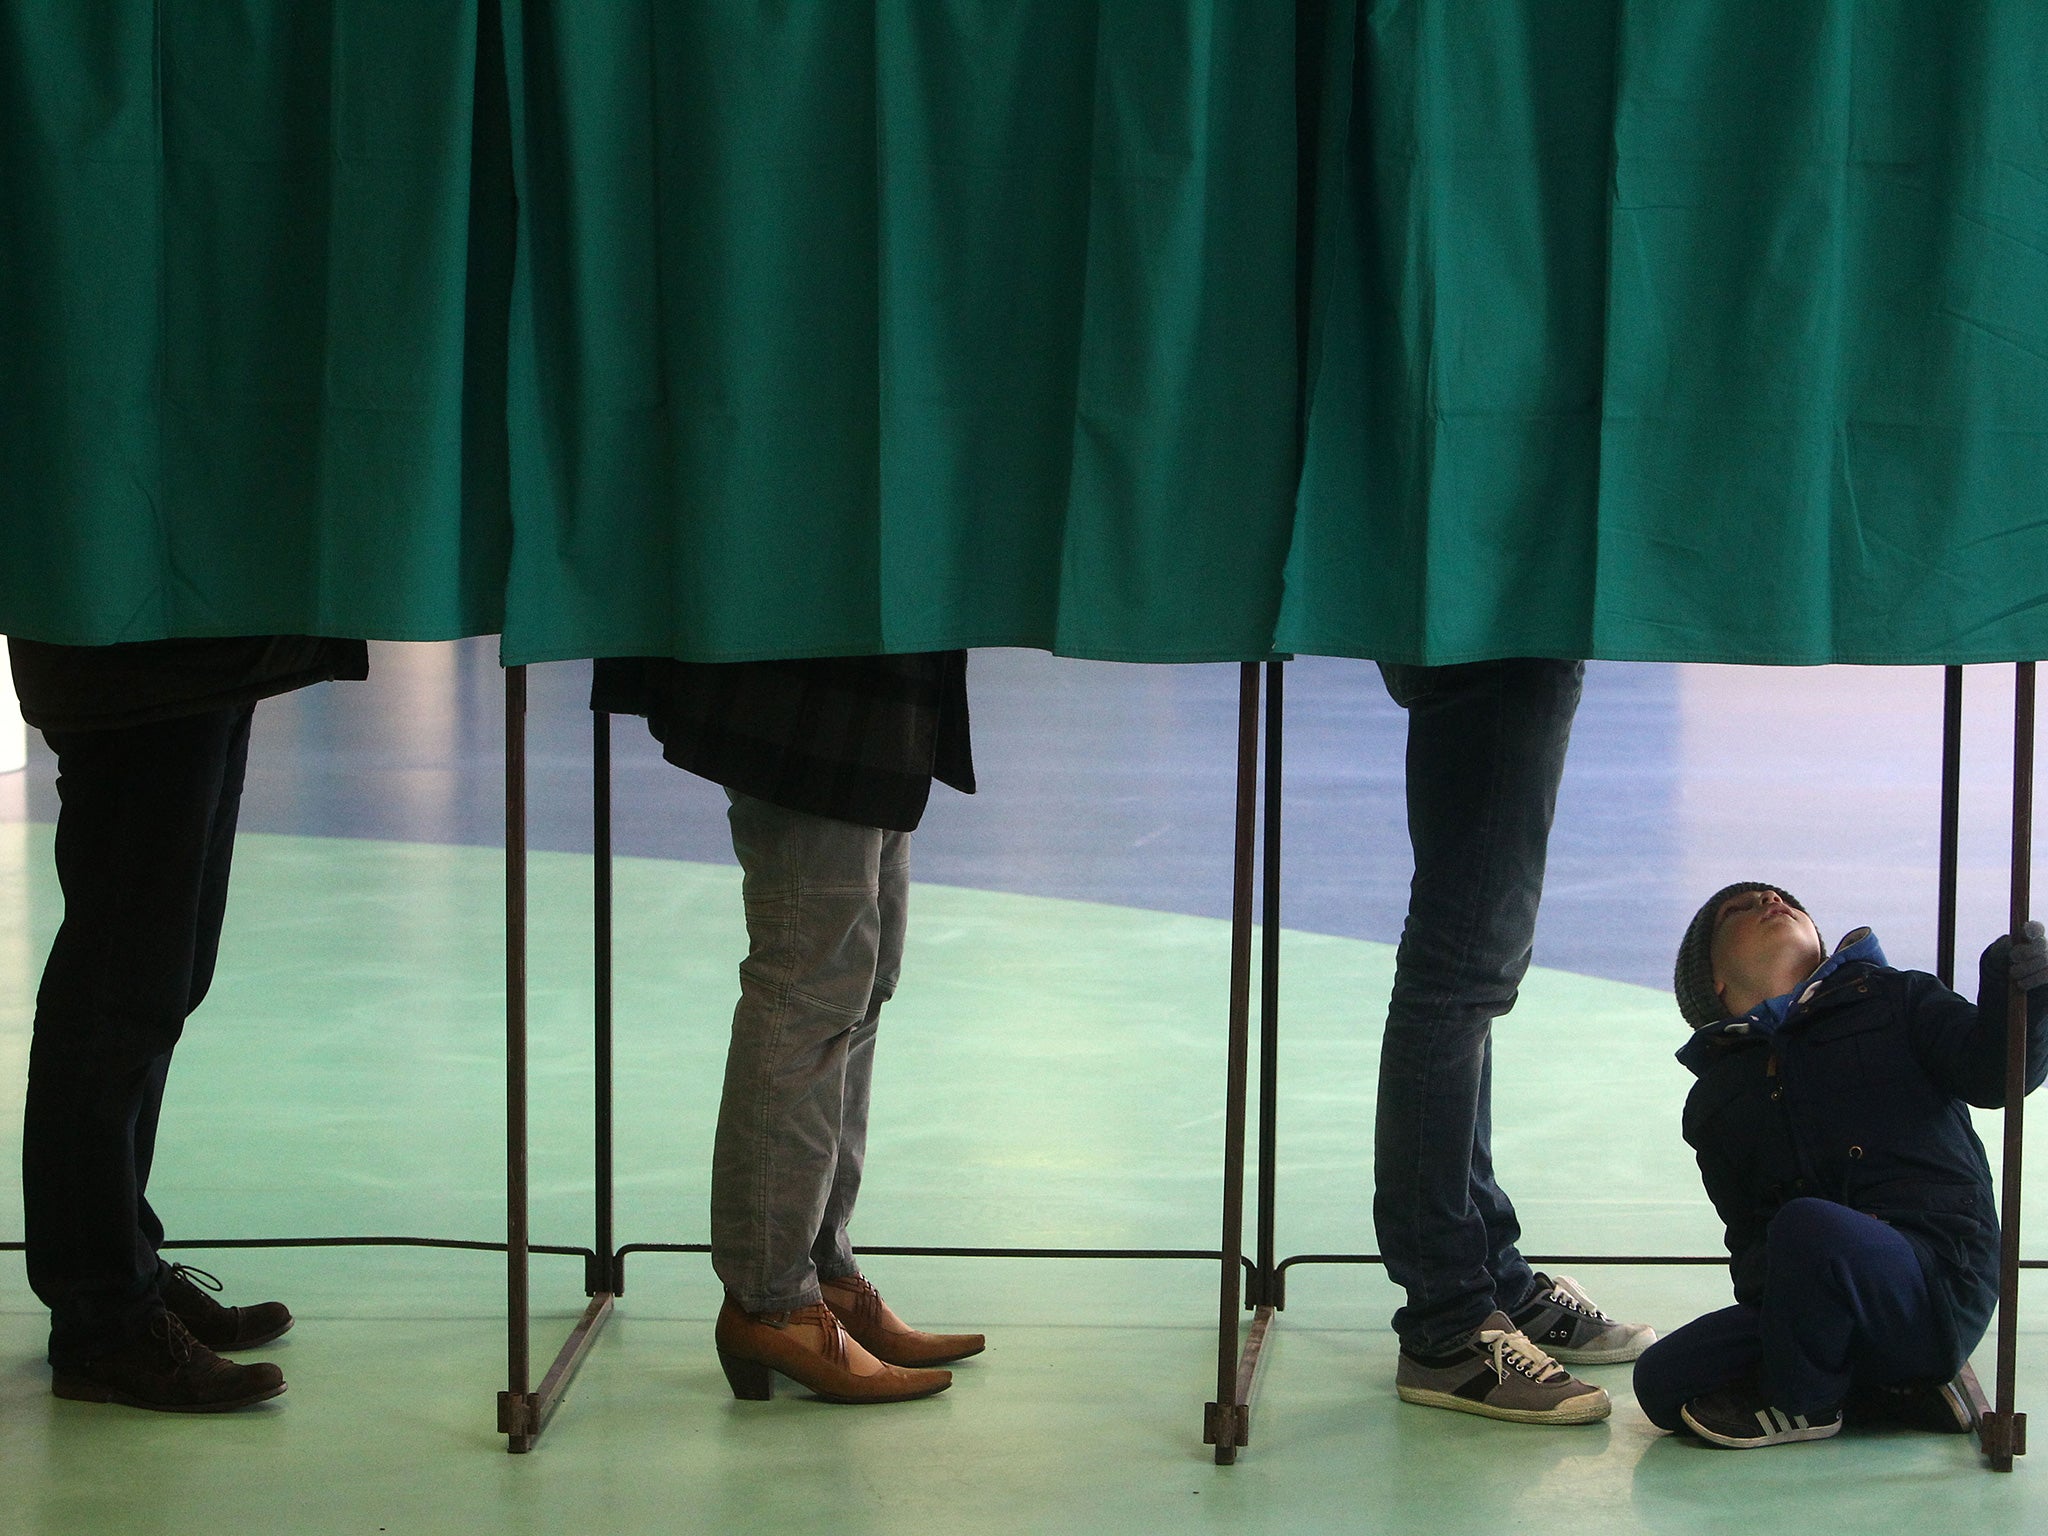 Voters stand in a polling booth during first round of regional elections, in Henin-Beaumont